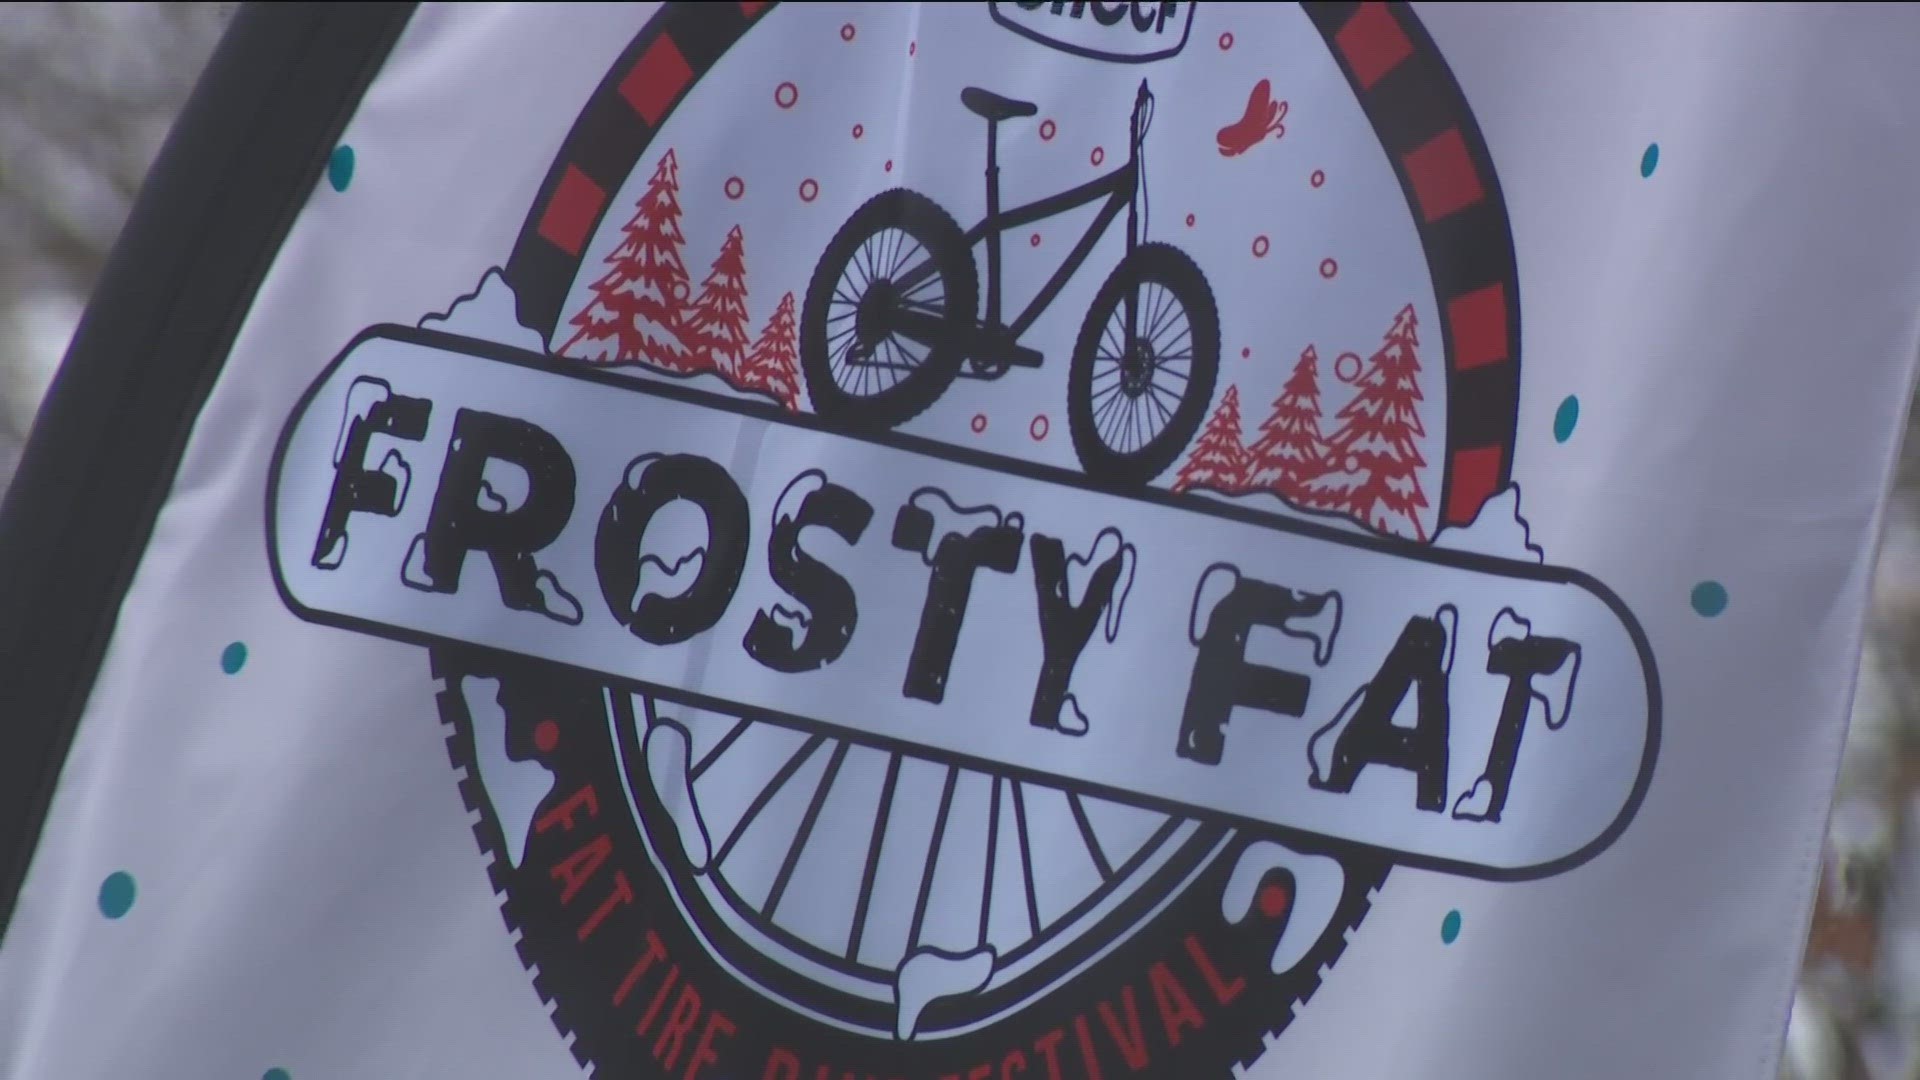 The 8th annual event raises money to help families pay their medical bills.